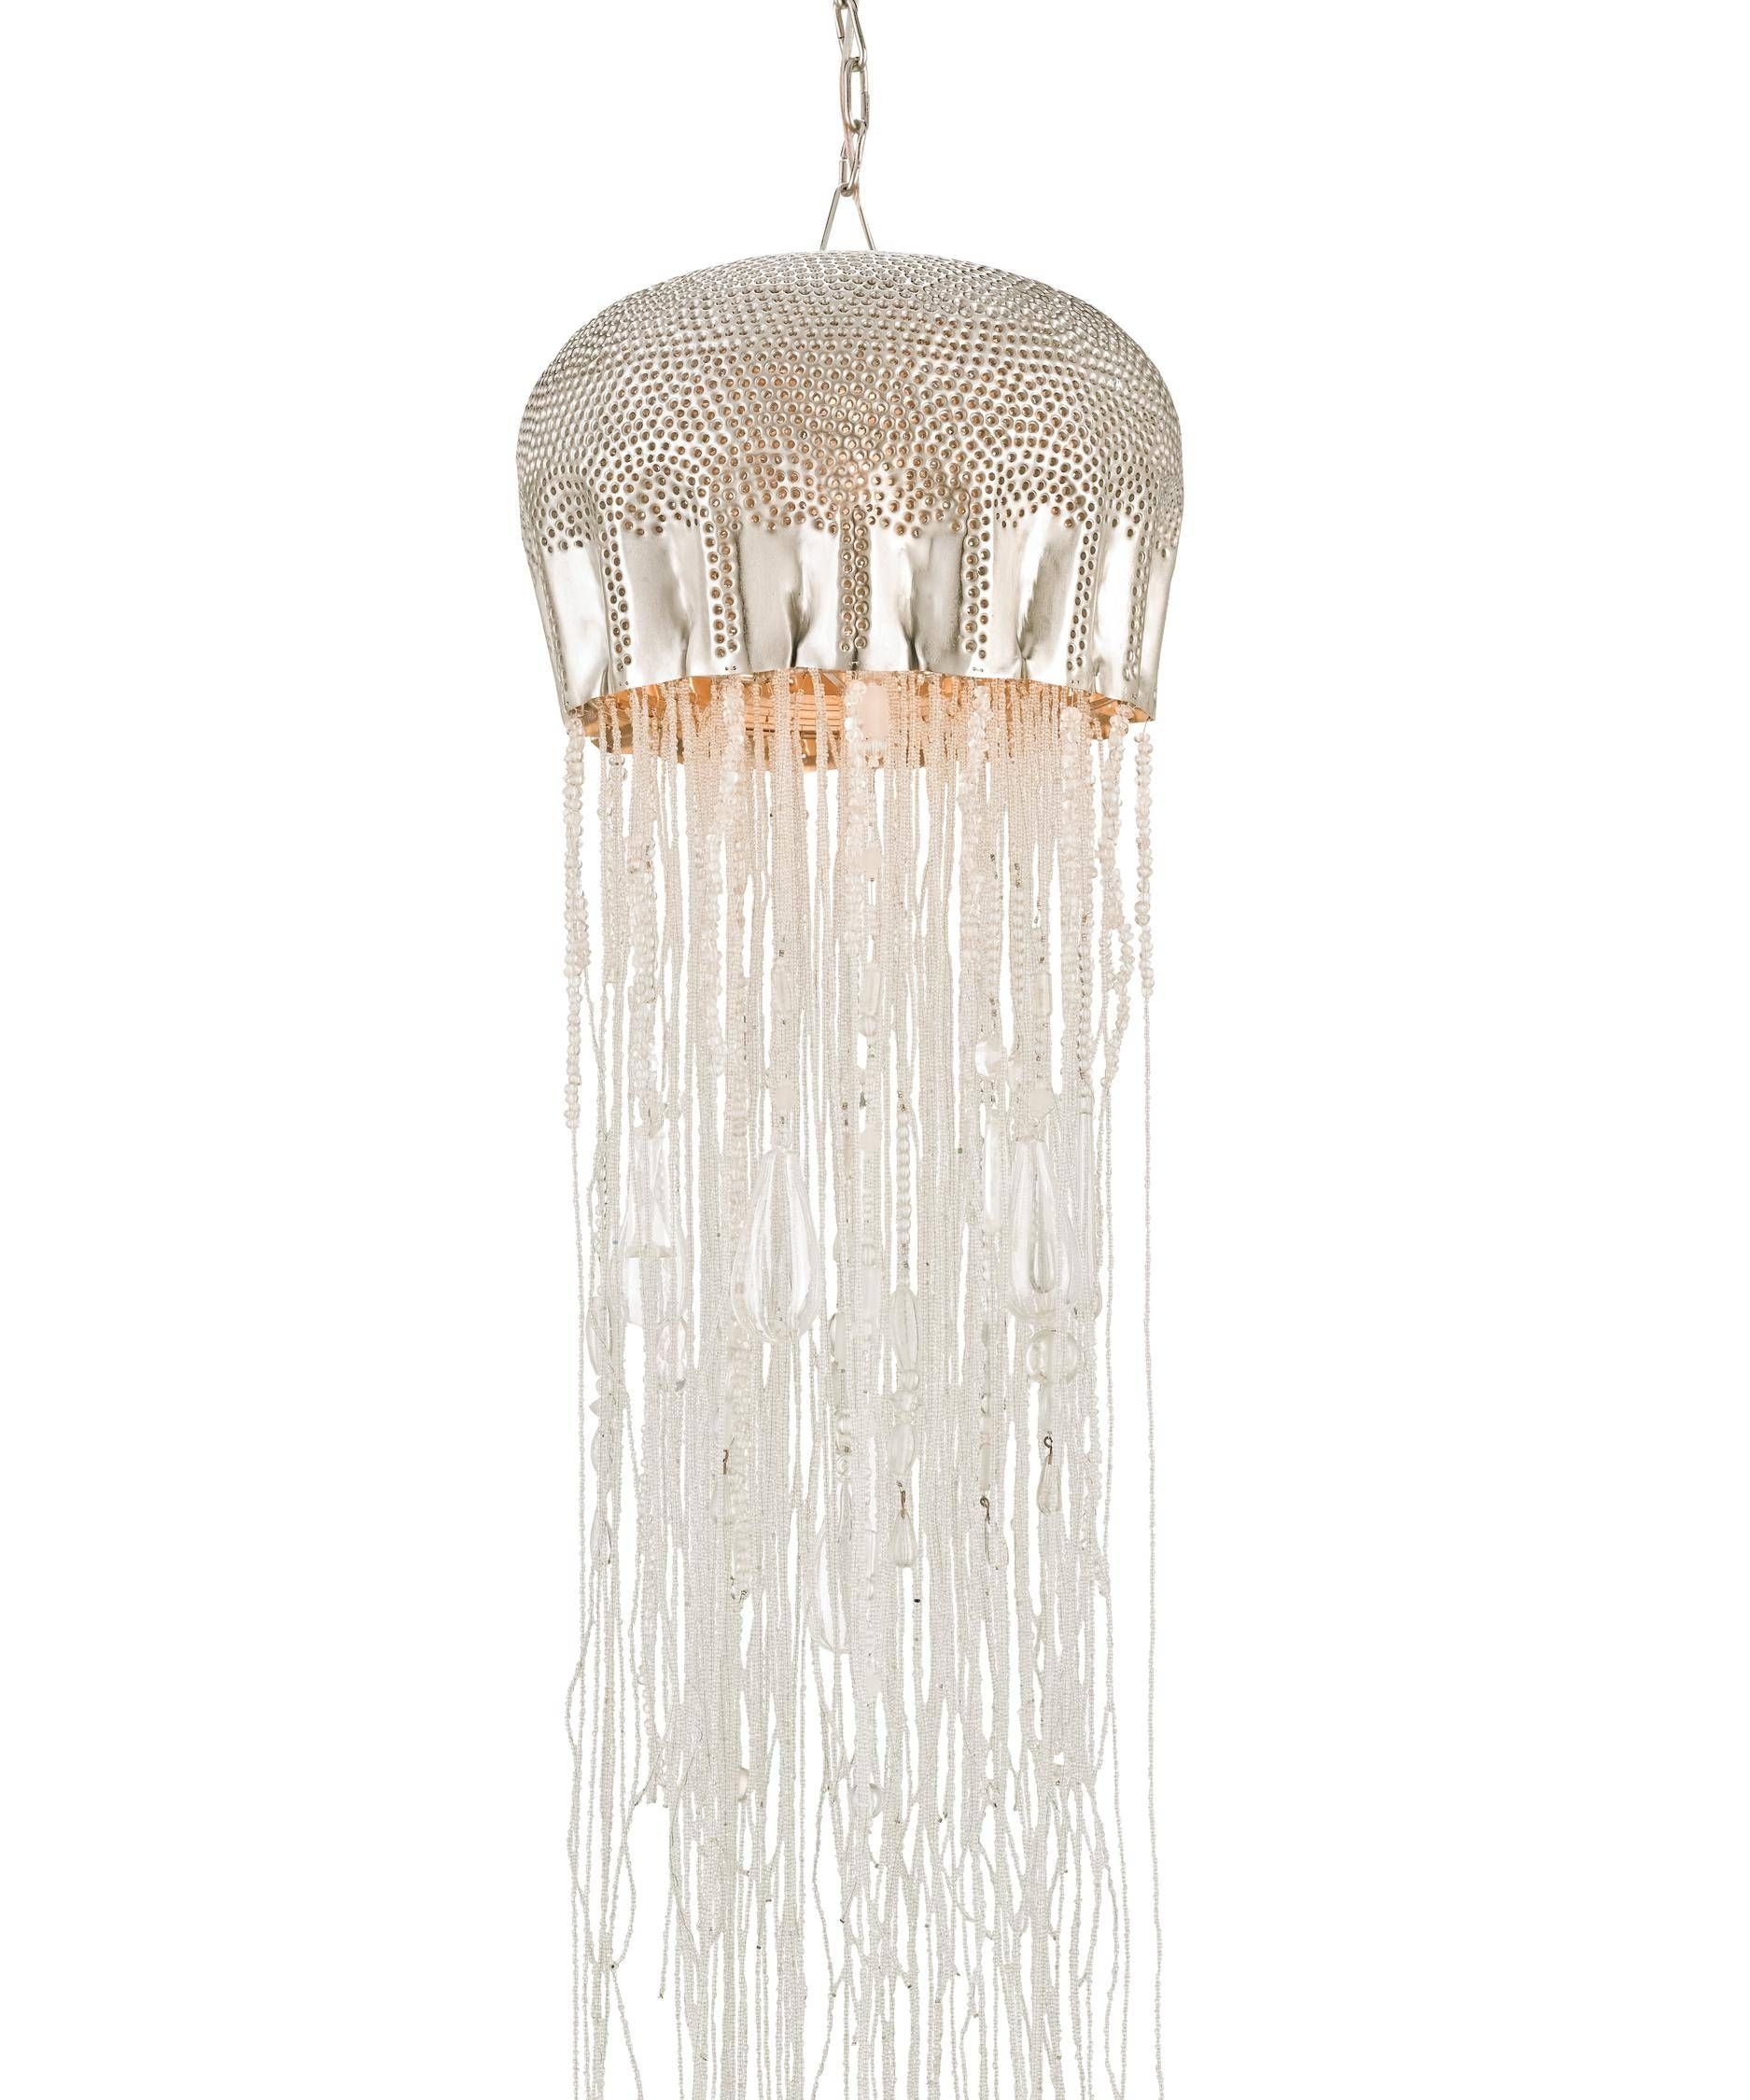 Currey And Company 9551 Medusa 12 Inch Wide 1 Light Mini Pendant Intended For Medusa Pendant Lights (View 13 of 15)